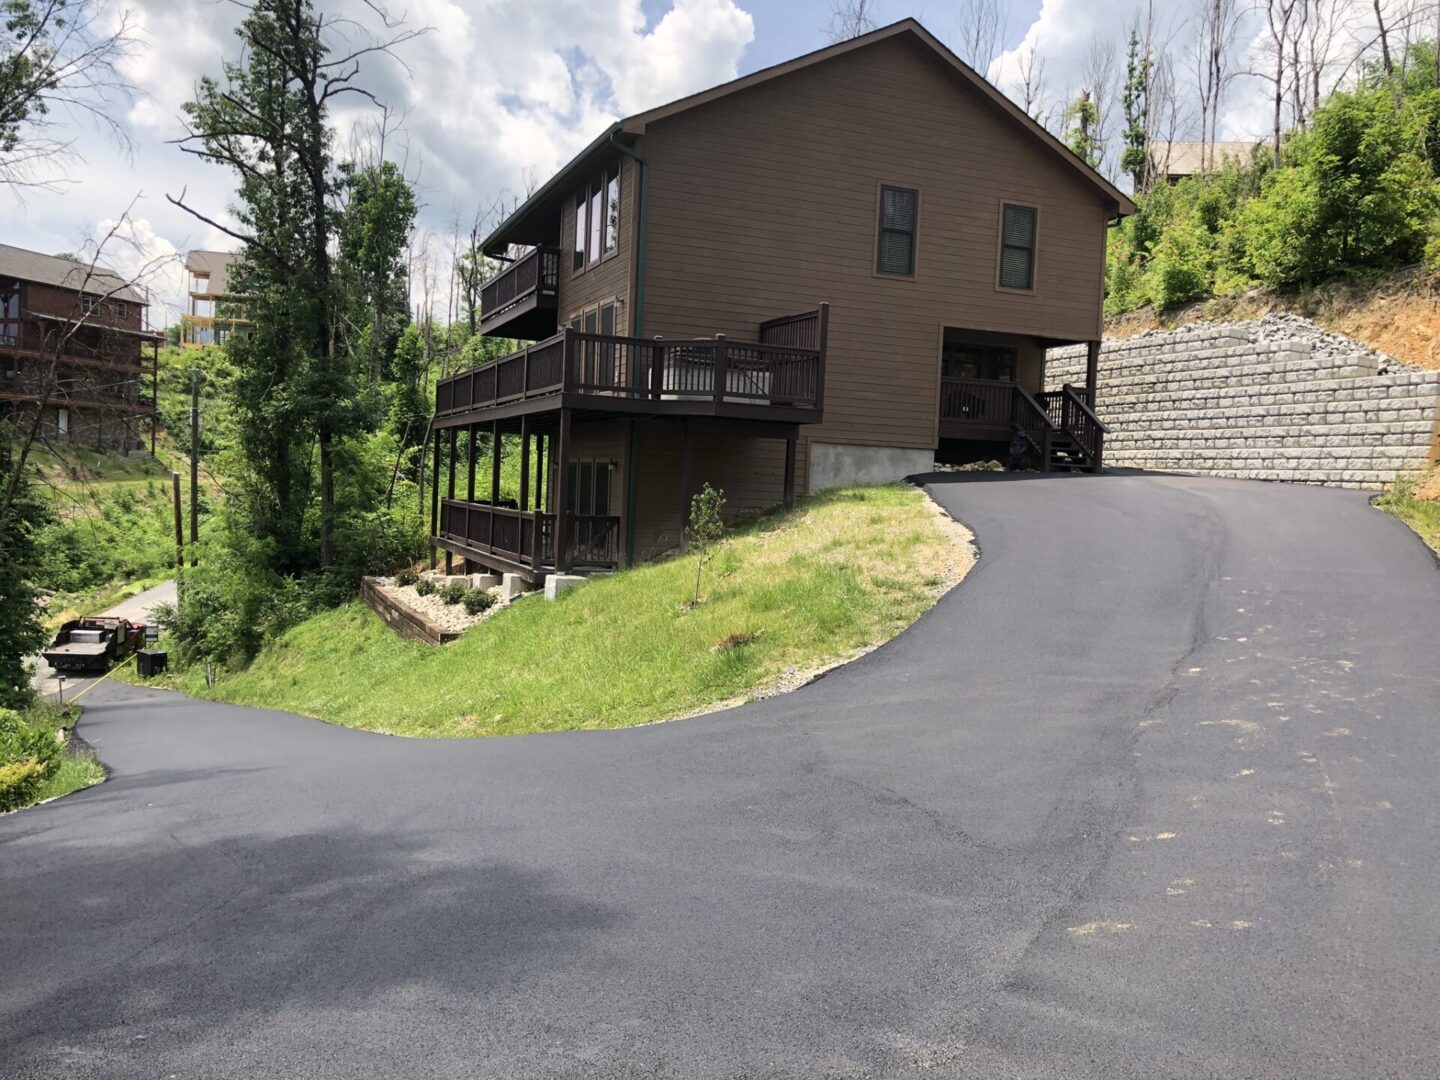 Driveway towards a residential property on a hill